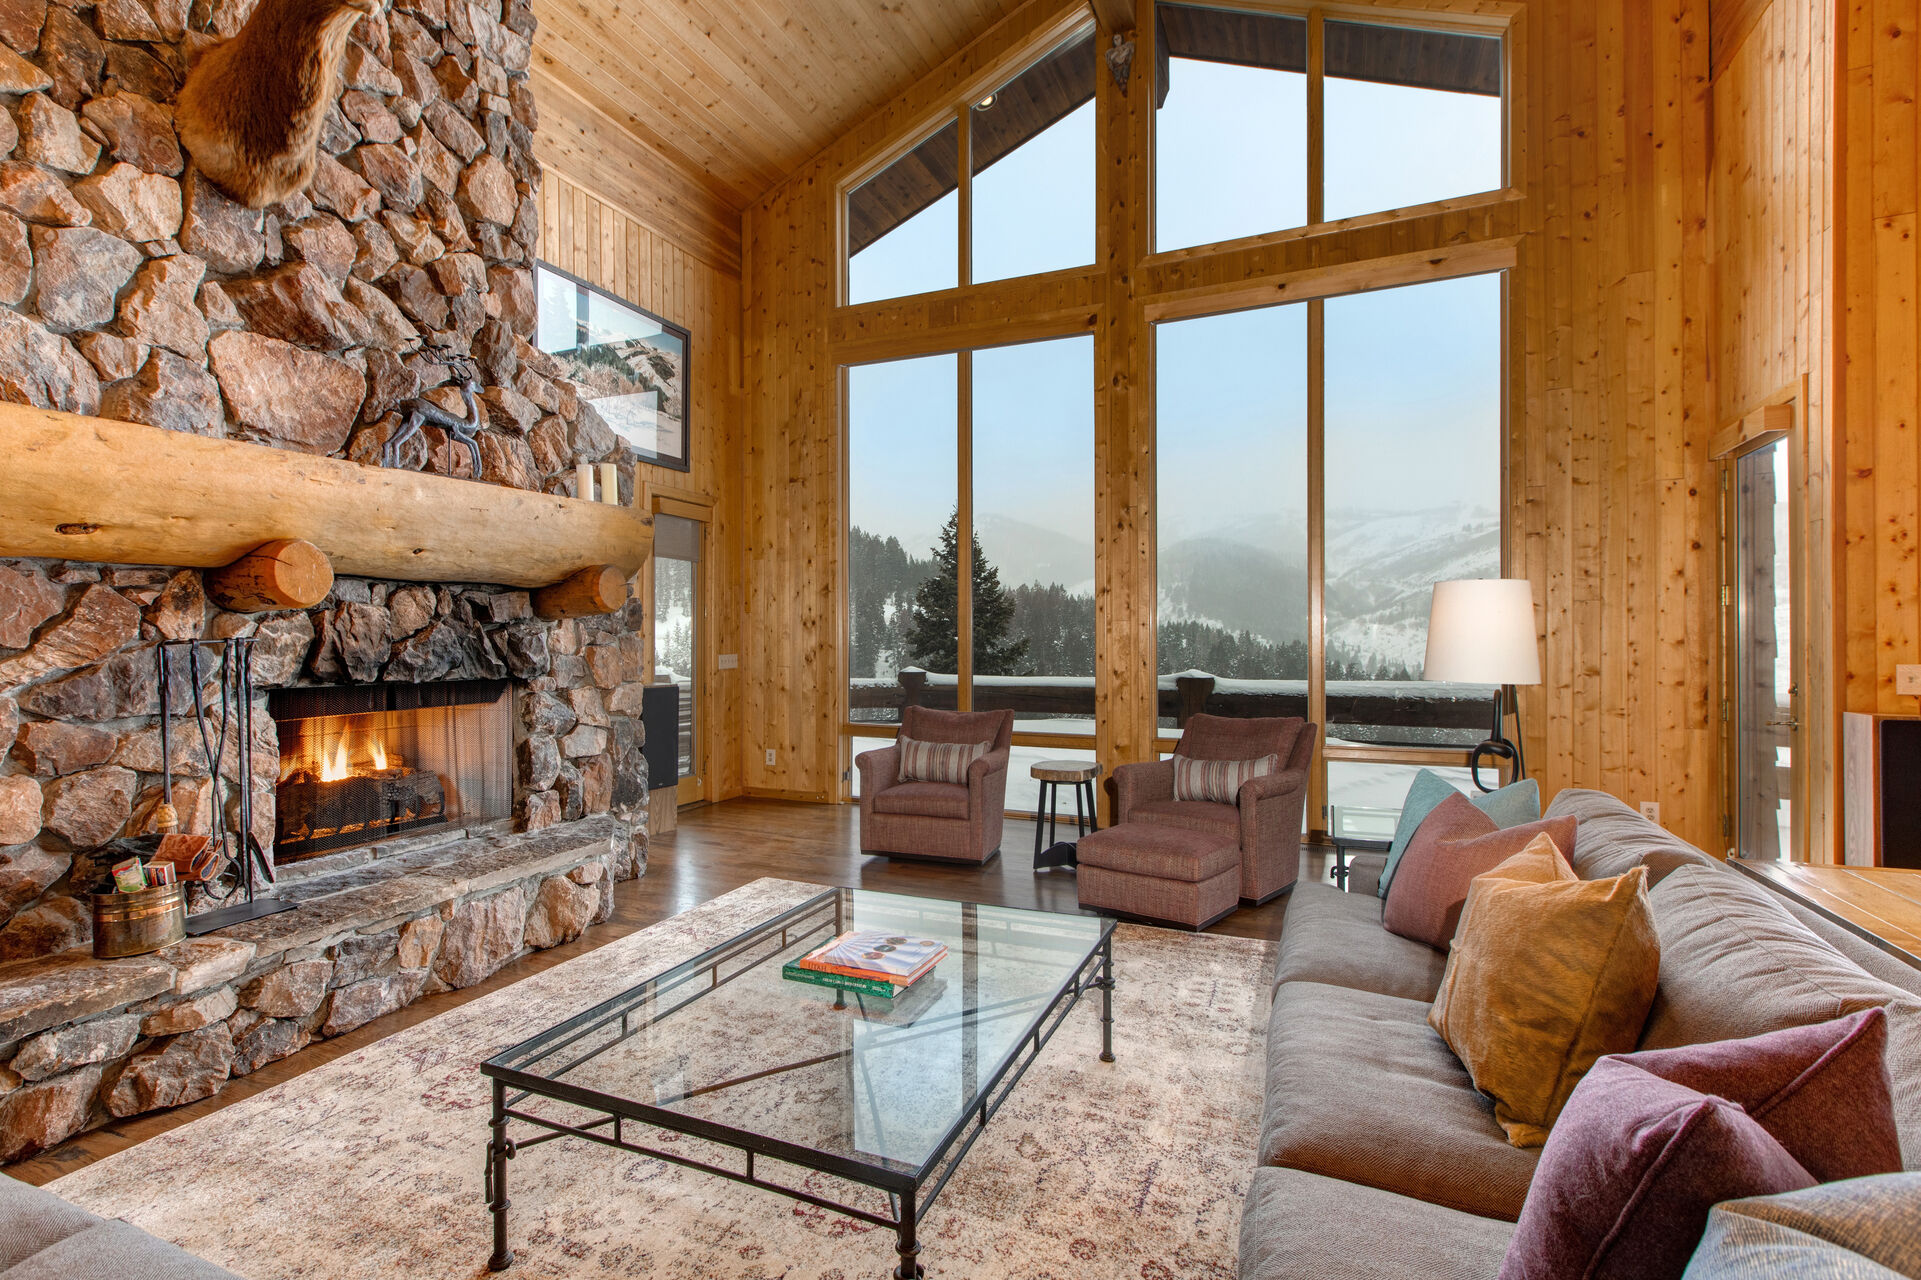 Living Room with Comfortable Furnishings, Wood Fireplace, Floor-to-Ceiling Windows, and Deck Access